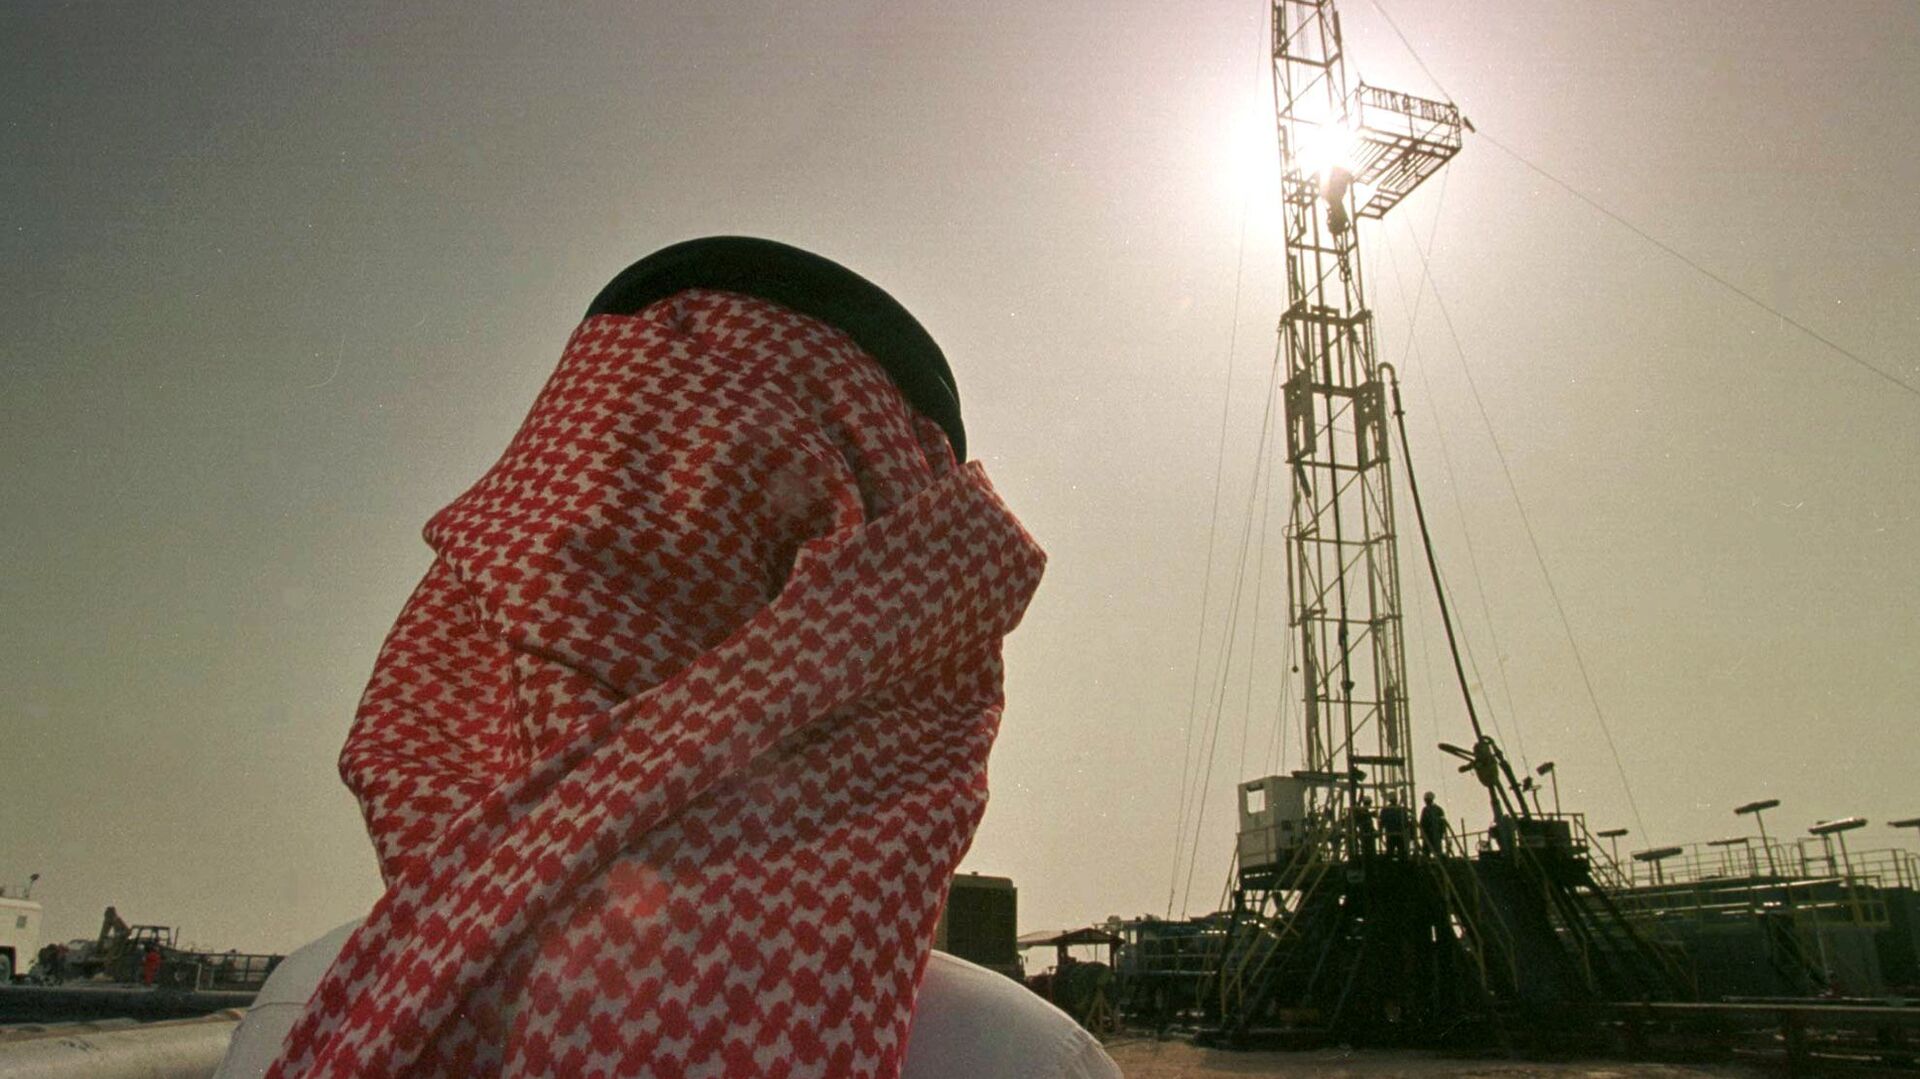 Khaled al Otaiby, an official of the Saudi oil company Aramco watches progress at a rig at the al-Howta oil field. - Sputnik International, 1920, 06.03.2021